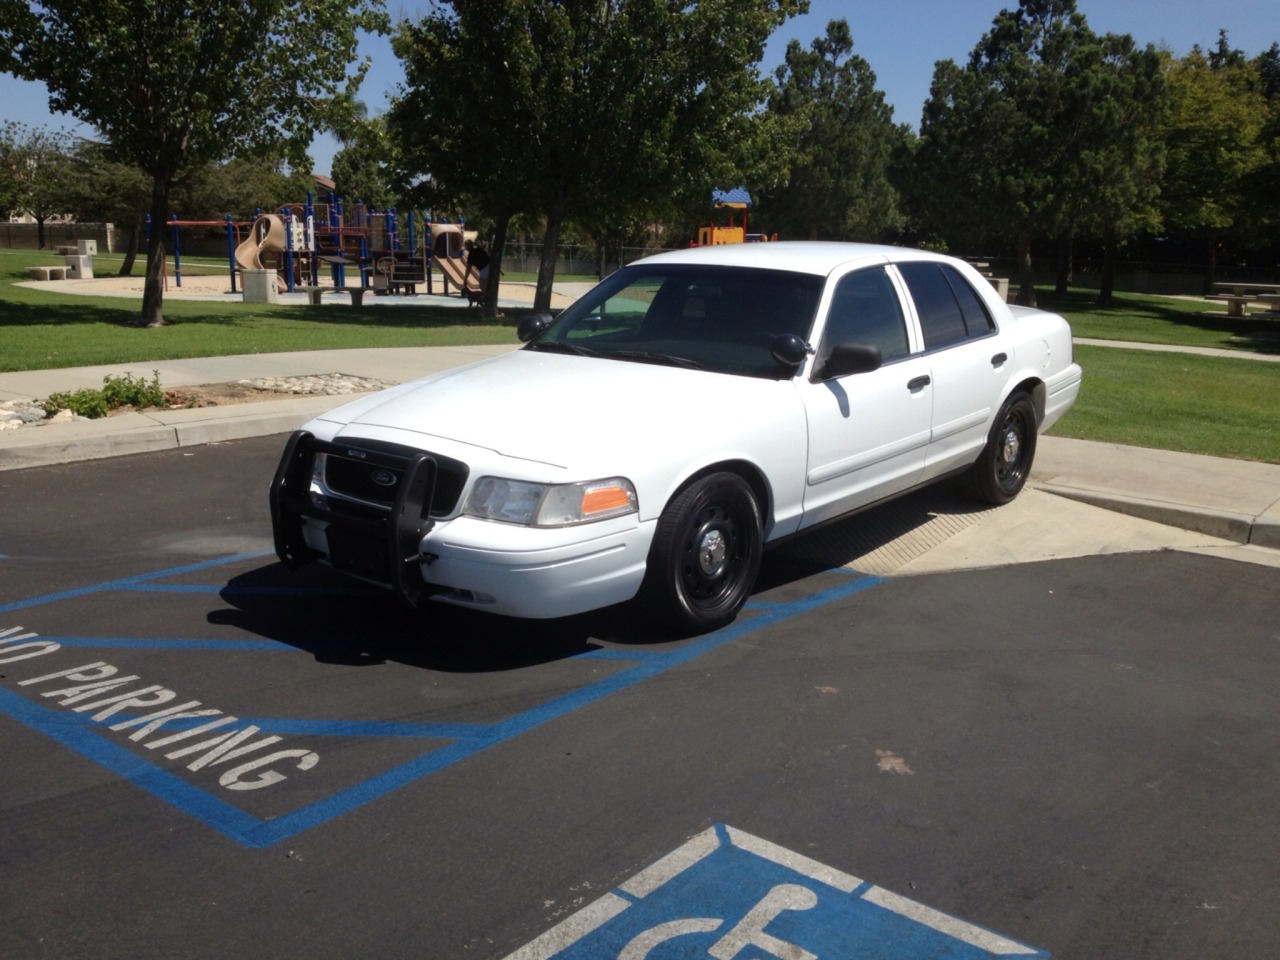 I got a couple request to see my cop car. Here it is, my 08, p71, crown vic, retired